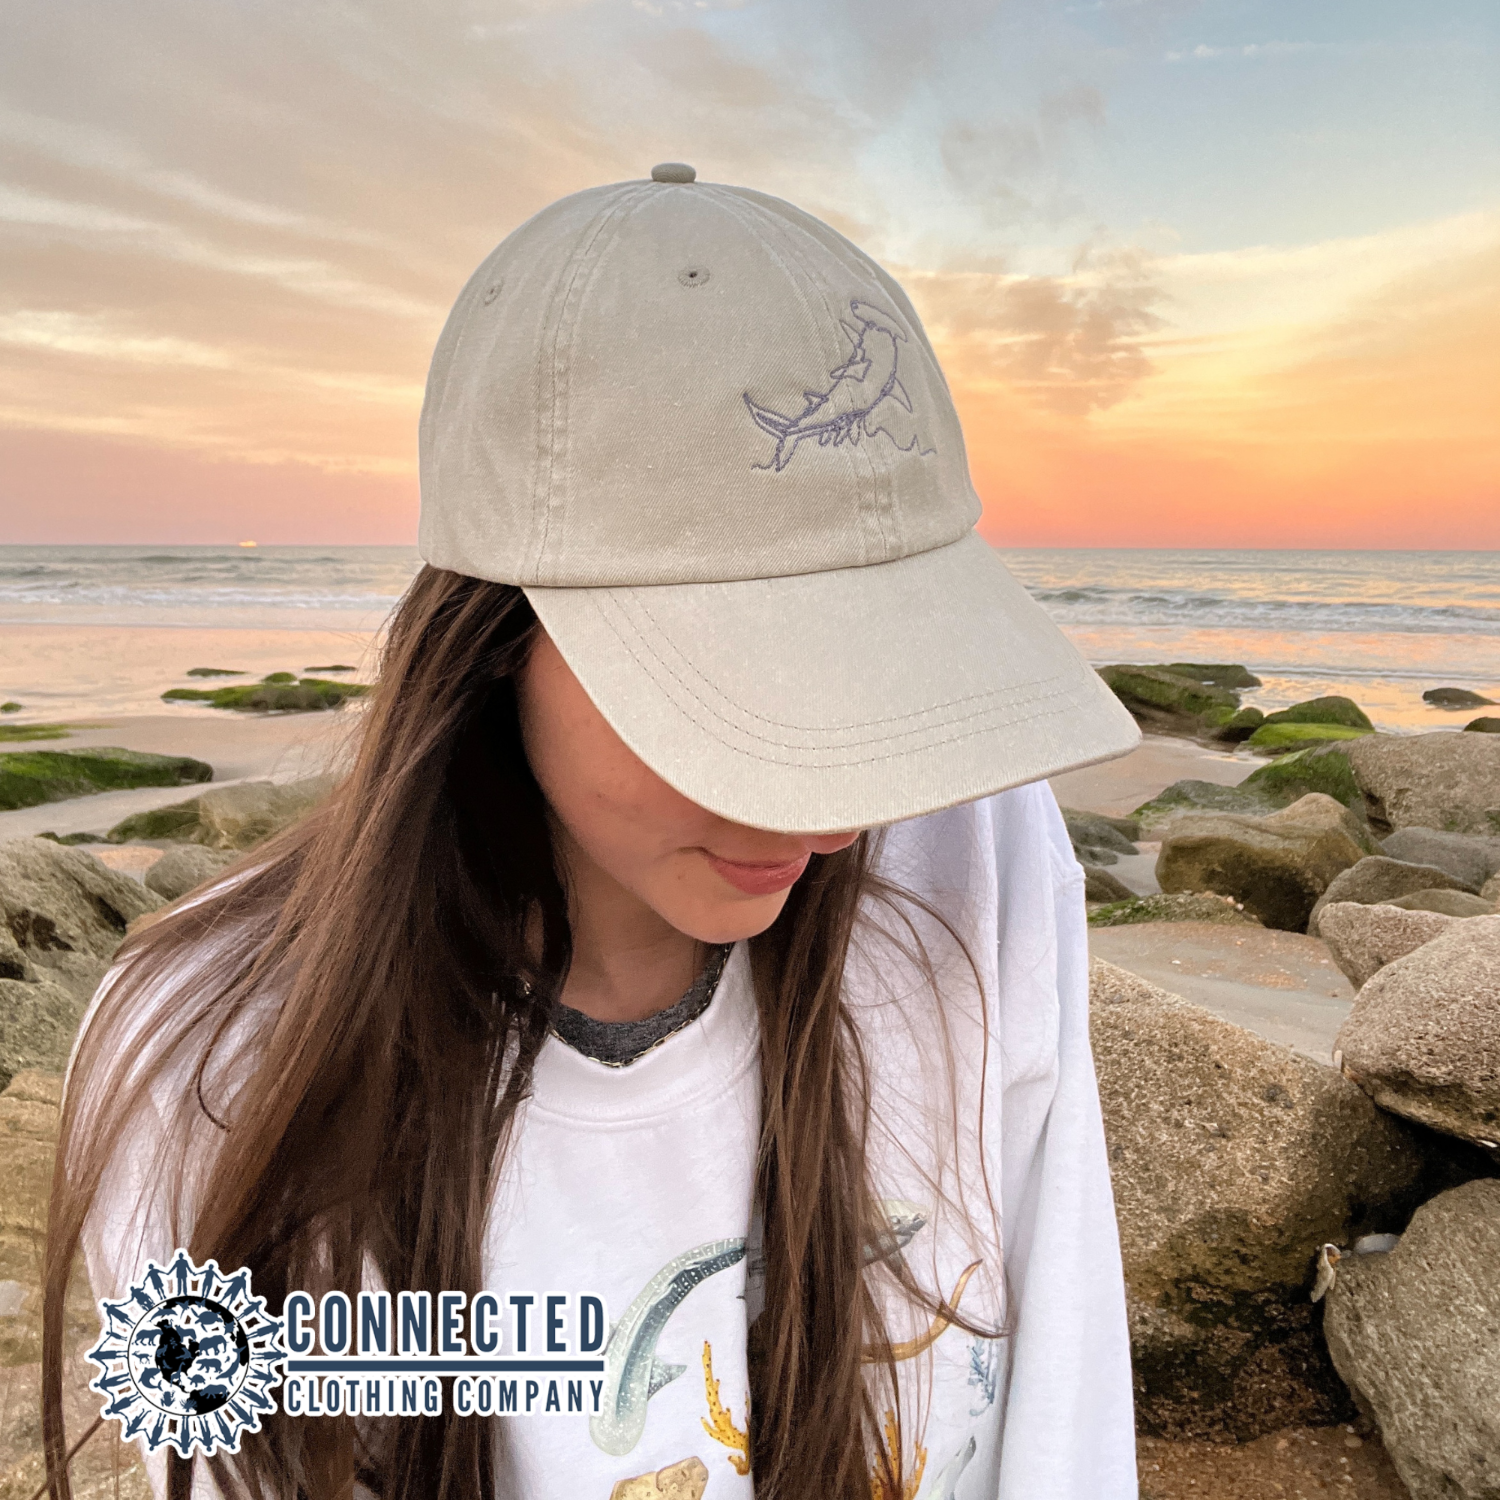 Hammerhead Shark Embroidered Hat - sweetsherriloudesigns - 10% of proceeds donated to ocean conservation